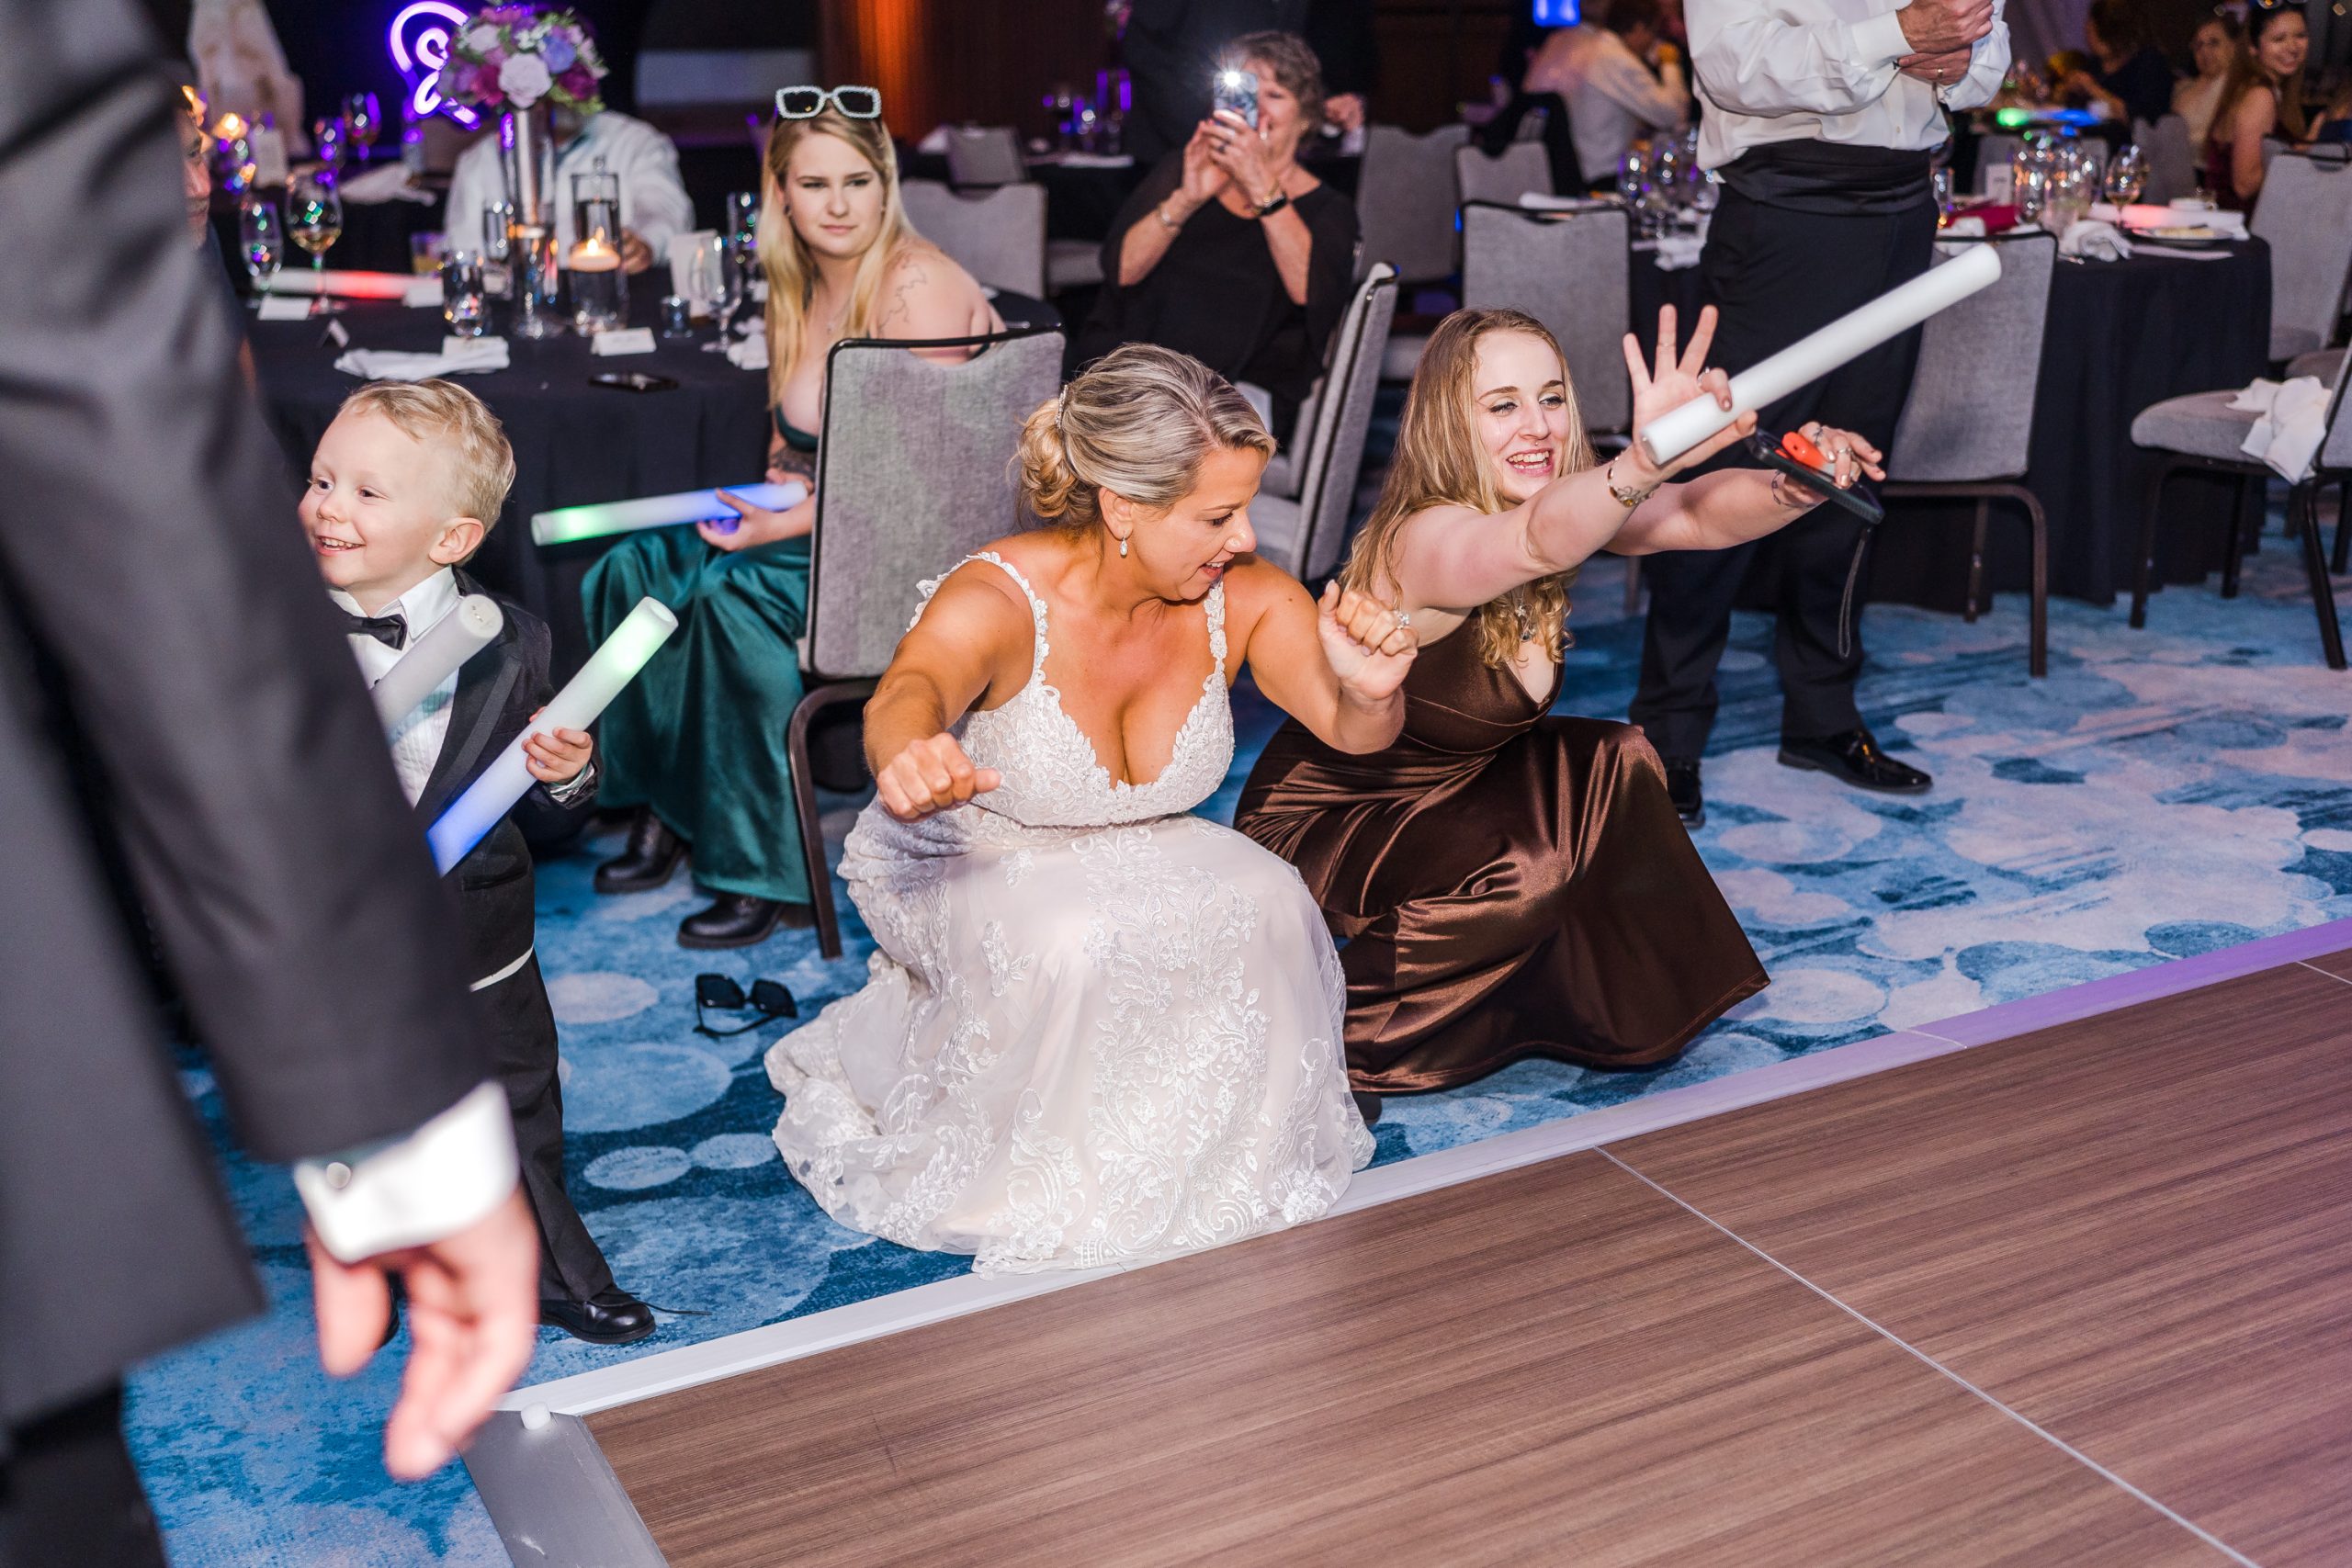 bride "dropping it low" with wedding guest